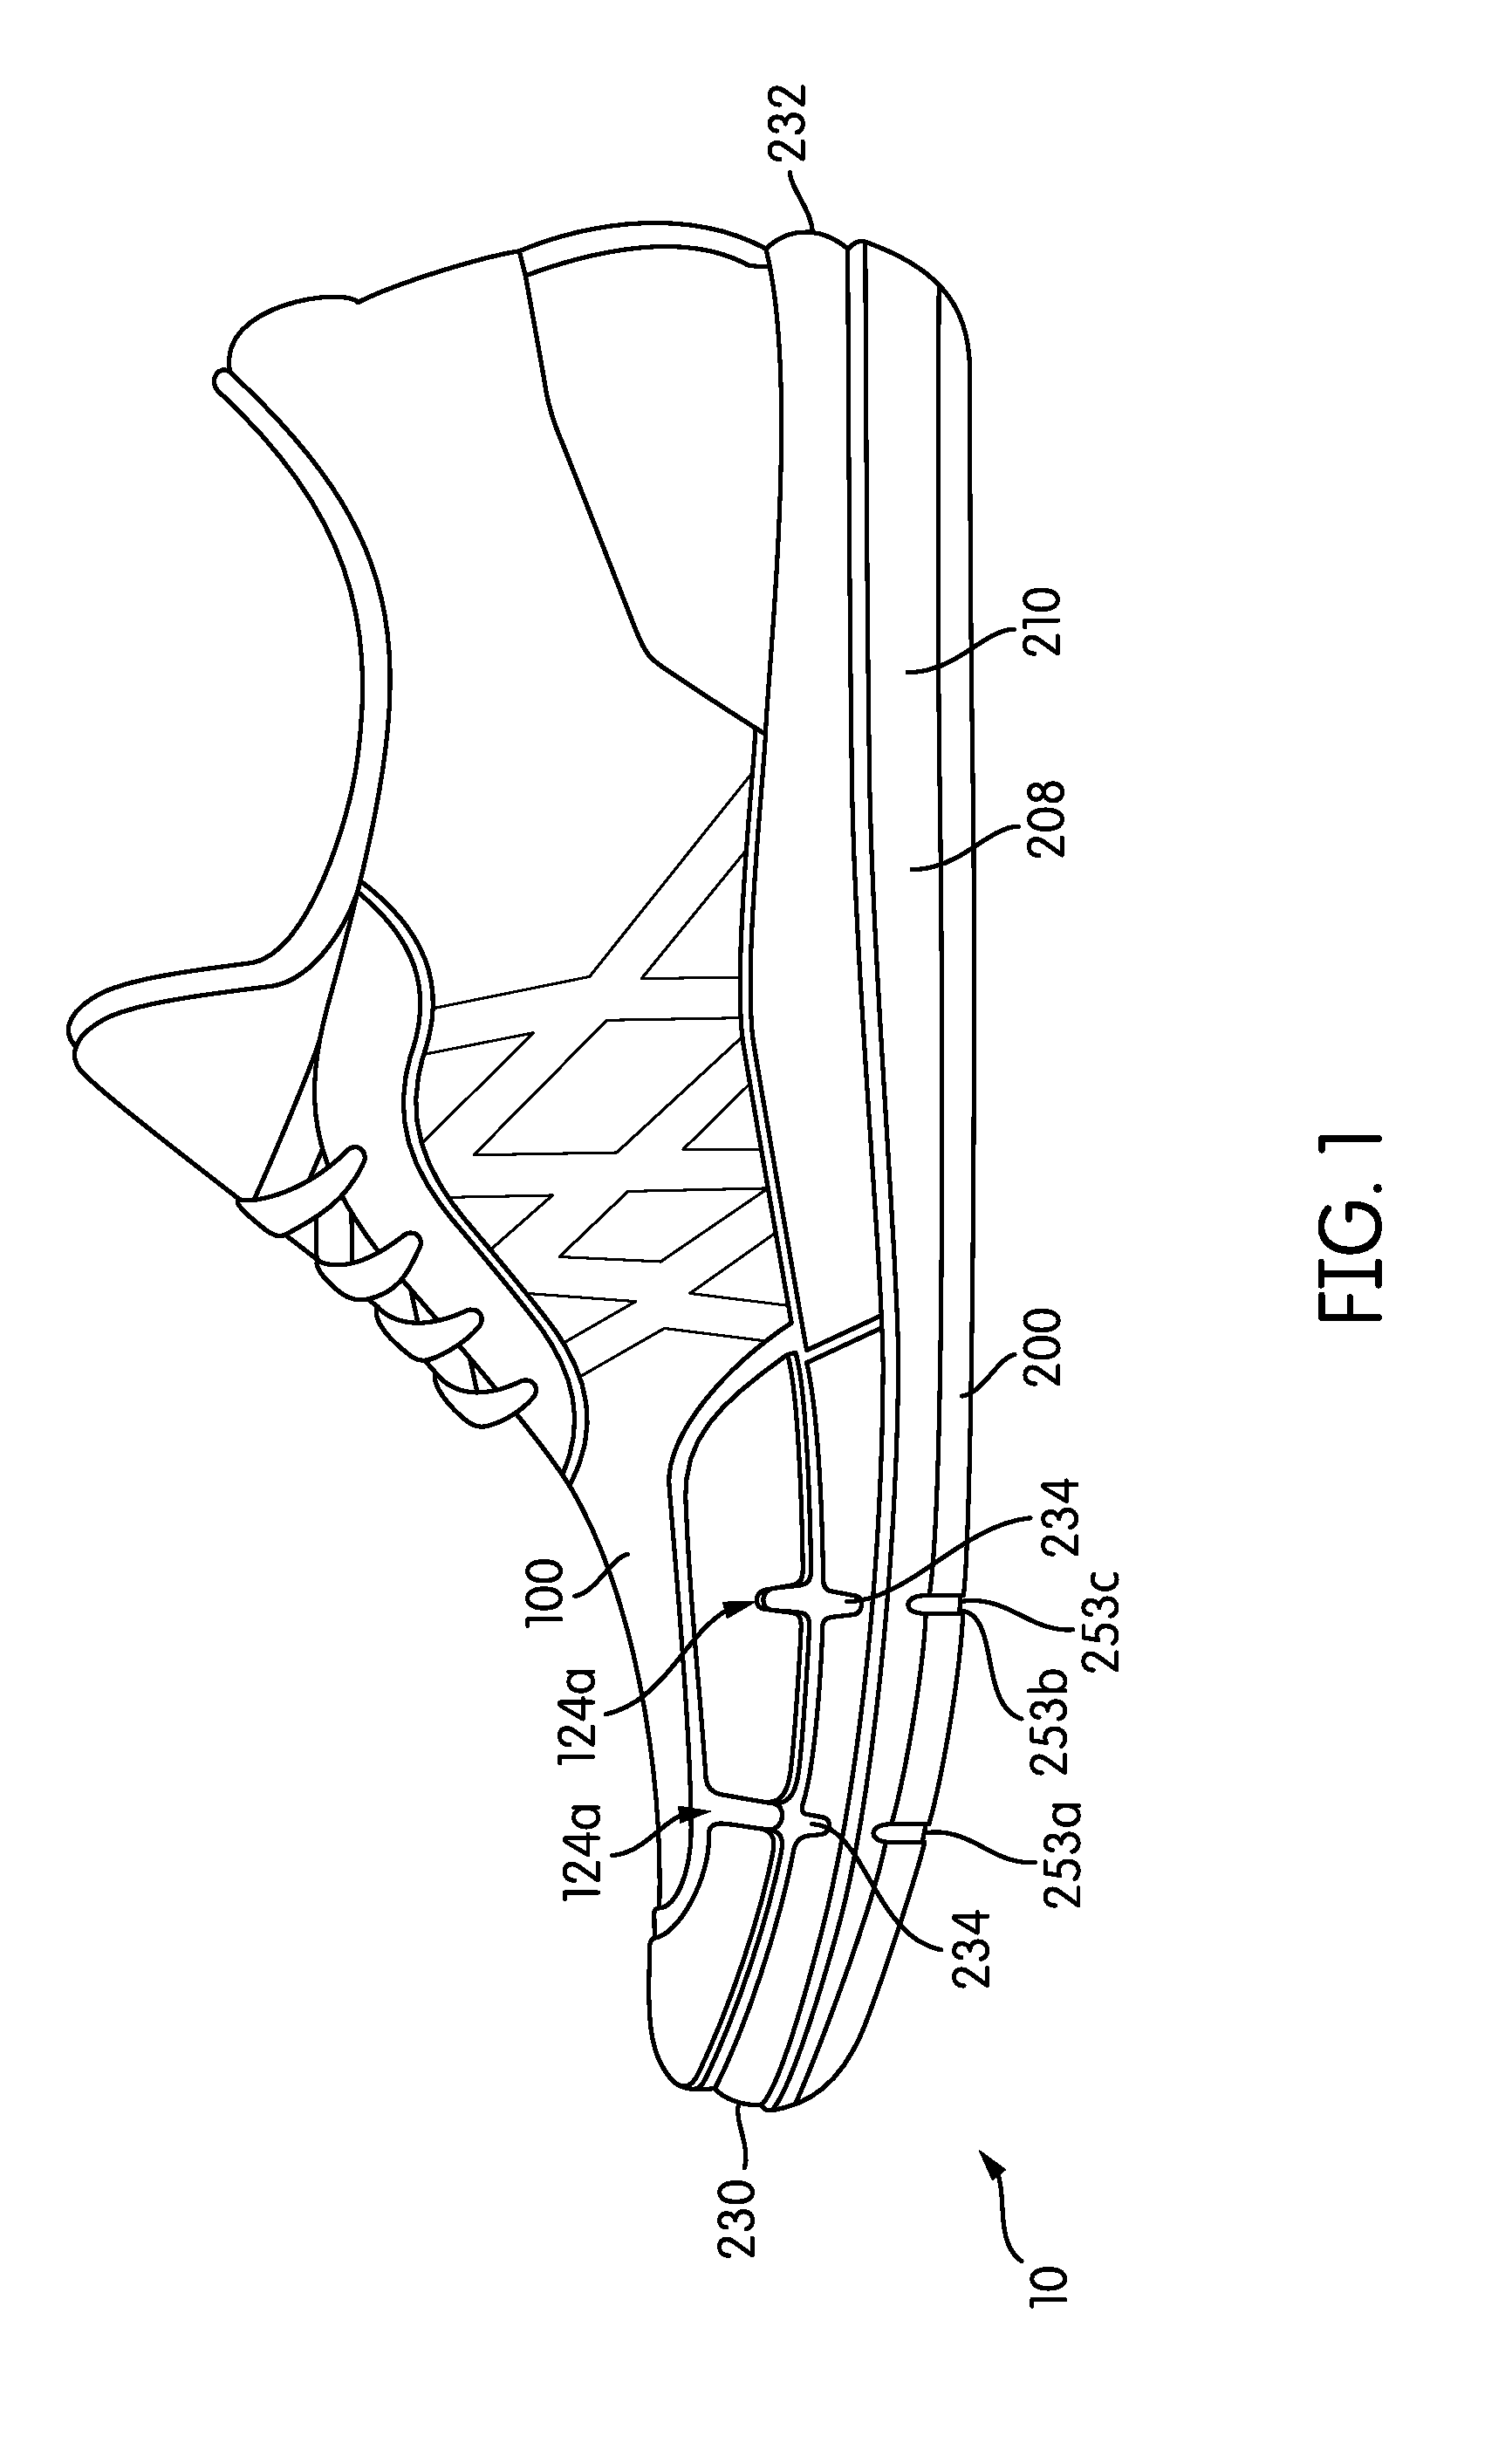 Uppers and sole structures for articles of footwear